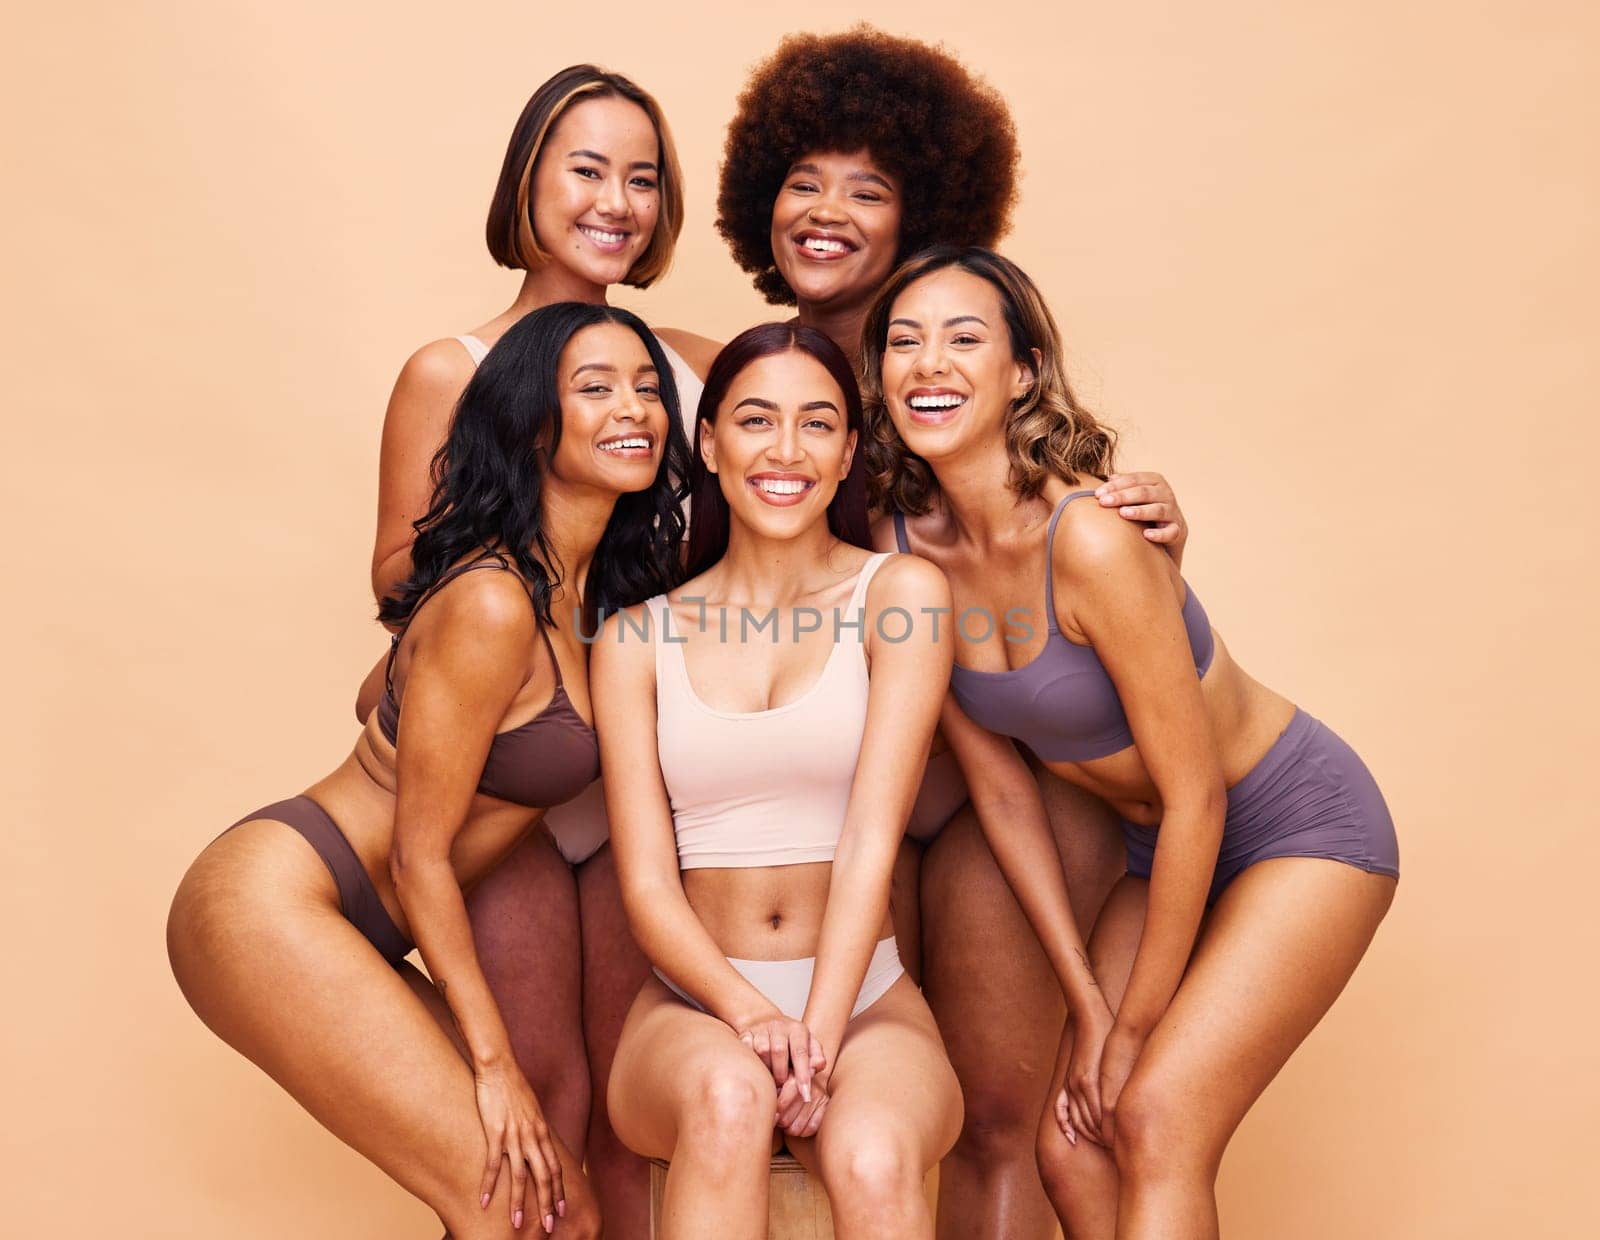 Diversity, beauty and portrait of happy women with body positivity, self love and solidarity in studio together. Smile, group of people on beige background in underwear, skincare and makeup cosmetics by YuriArcurs